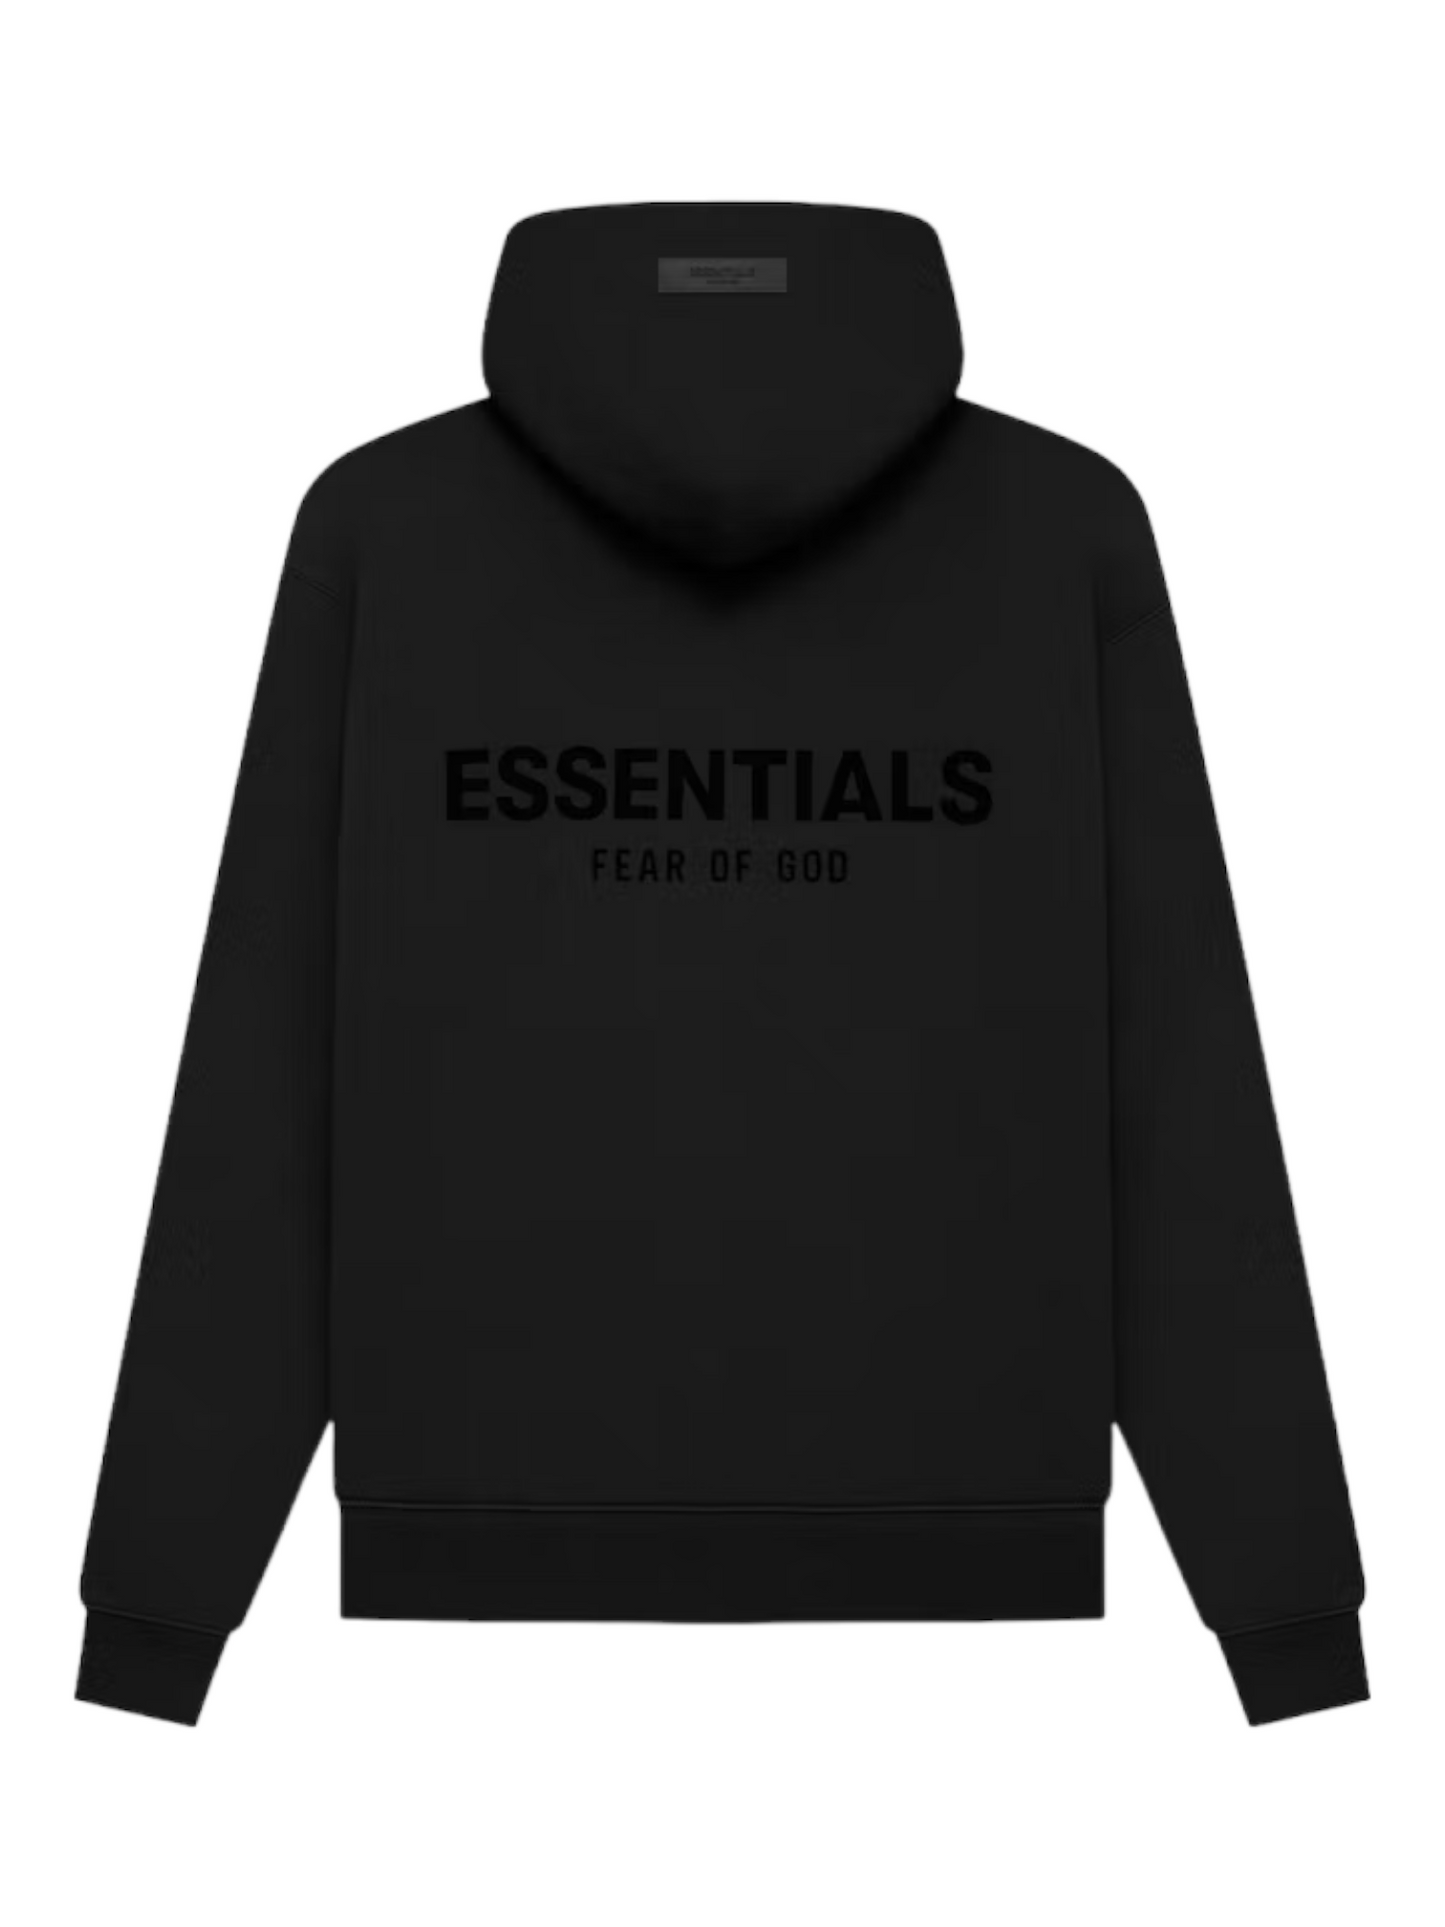 Essentials Fear of God Stretch Limo Black Fleece Hoodie SS22 - Genuine Design Luxury Consignment Calgary, Canada New & Pre-Owned Authentic Clothing, Shoes, Accessories.